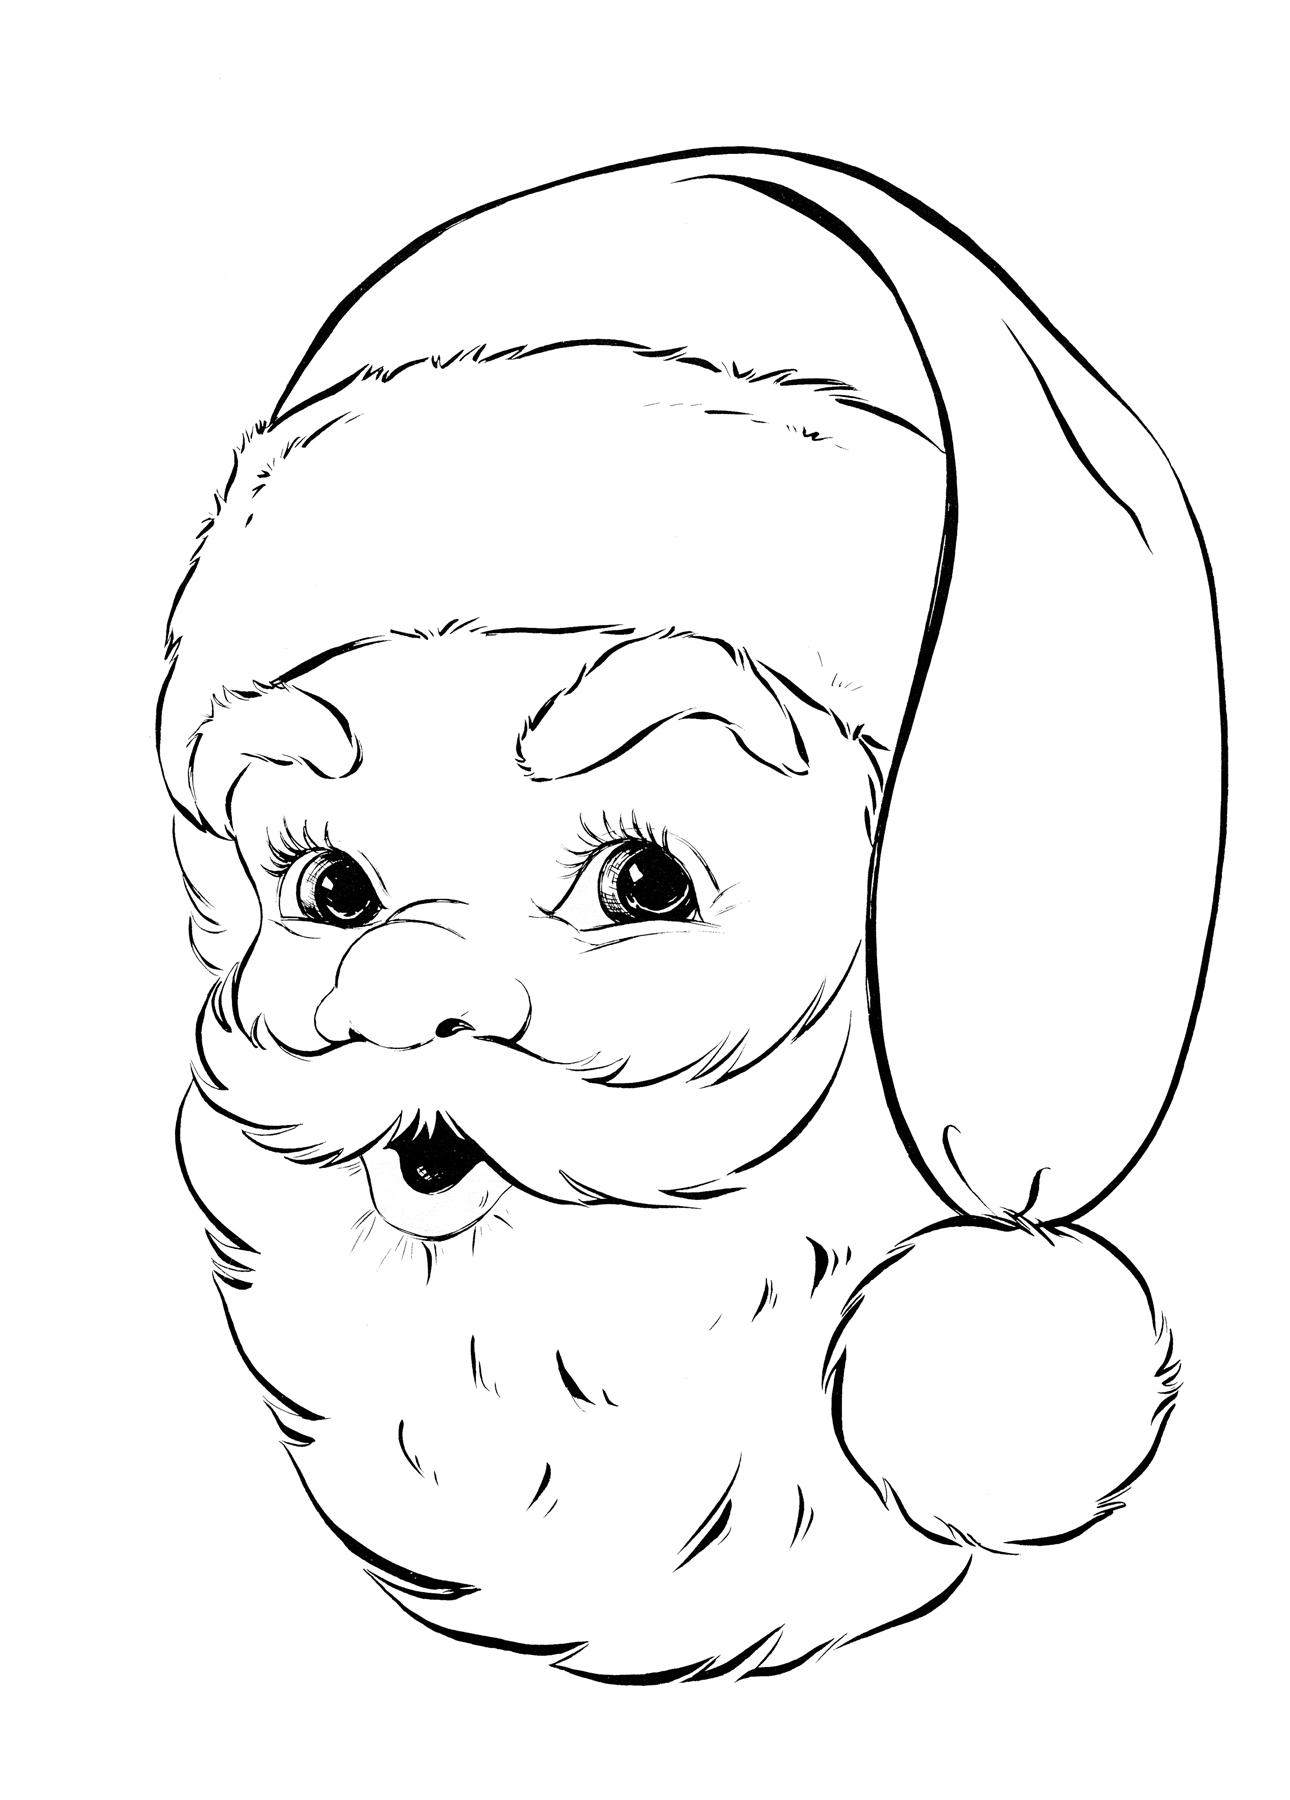 Children's Christmas Coloring Pages Free Retro Santa Coloring Page The Graphics Fairy